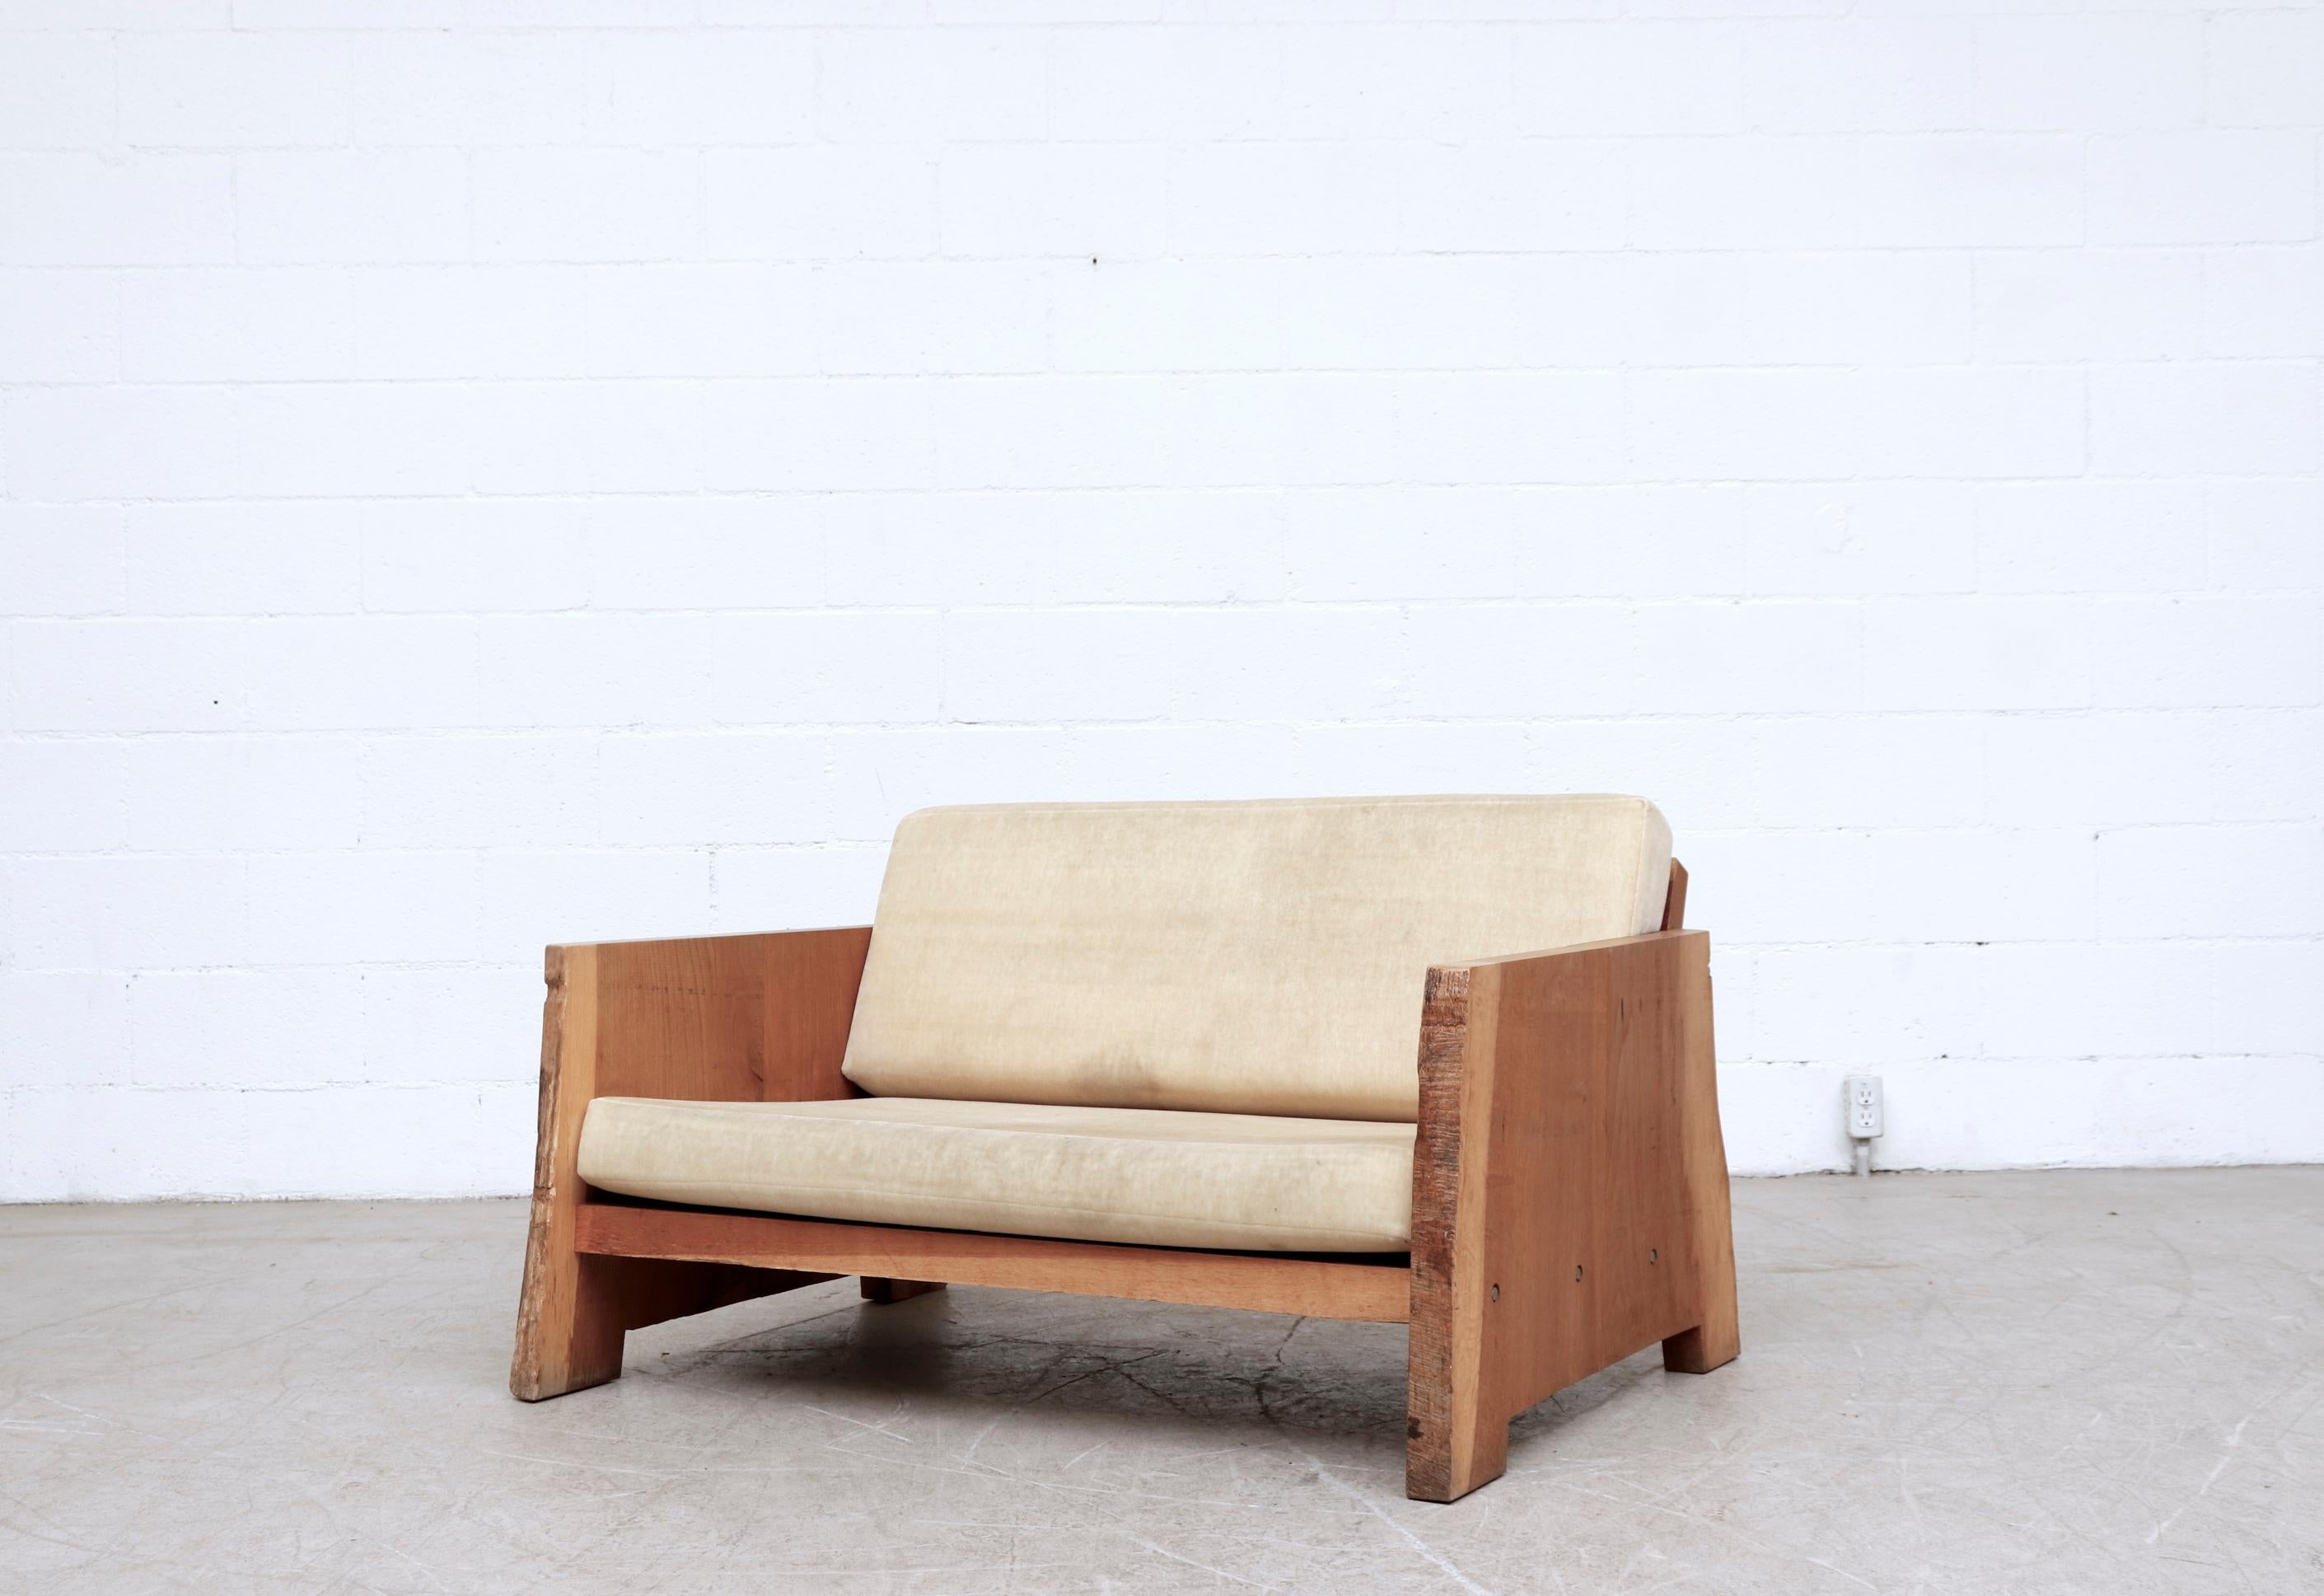 Gorgeous live edge solid oak Piet Hein eek loveseat with original mohair cushions. This listing is for the loveseat only. Cushions show visible wear and staining. The sofa is made of massive rough cut slices of tree with large lag bolt fastening in